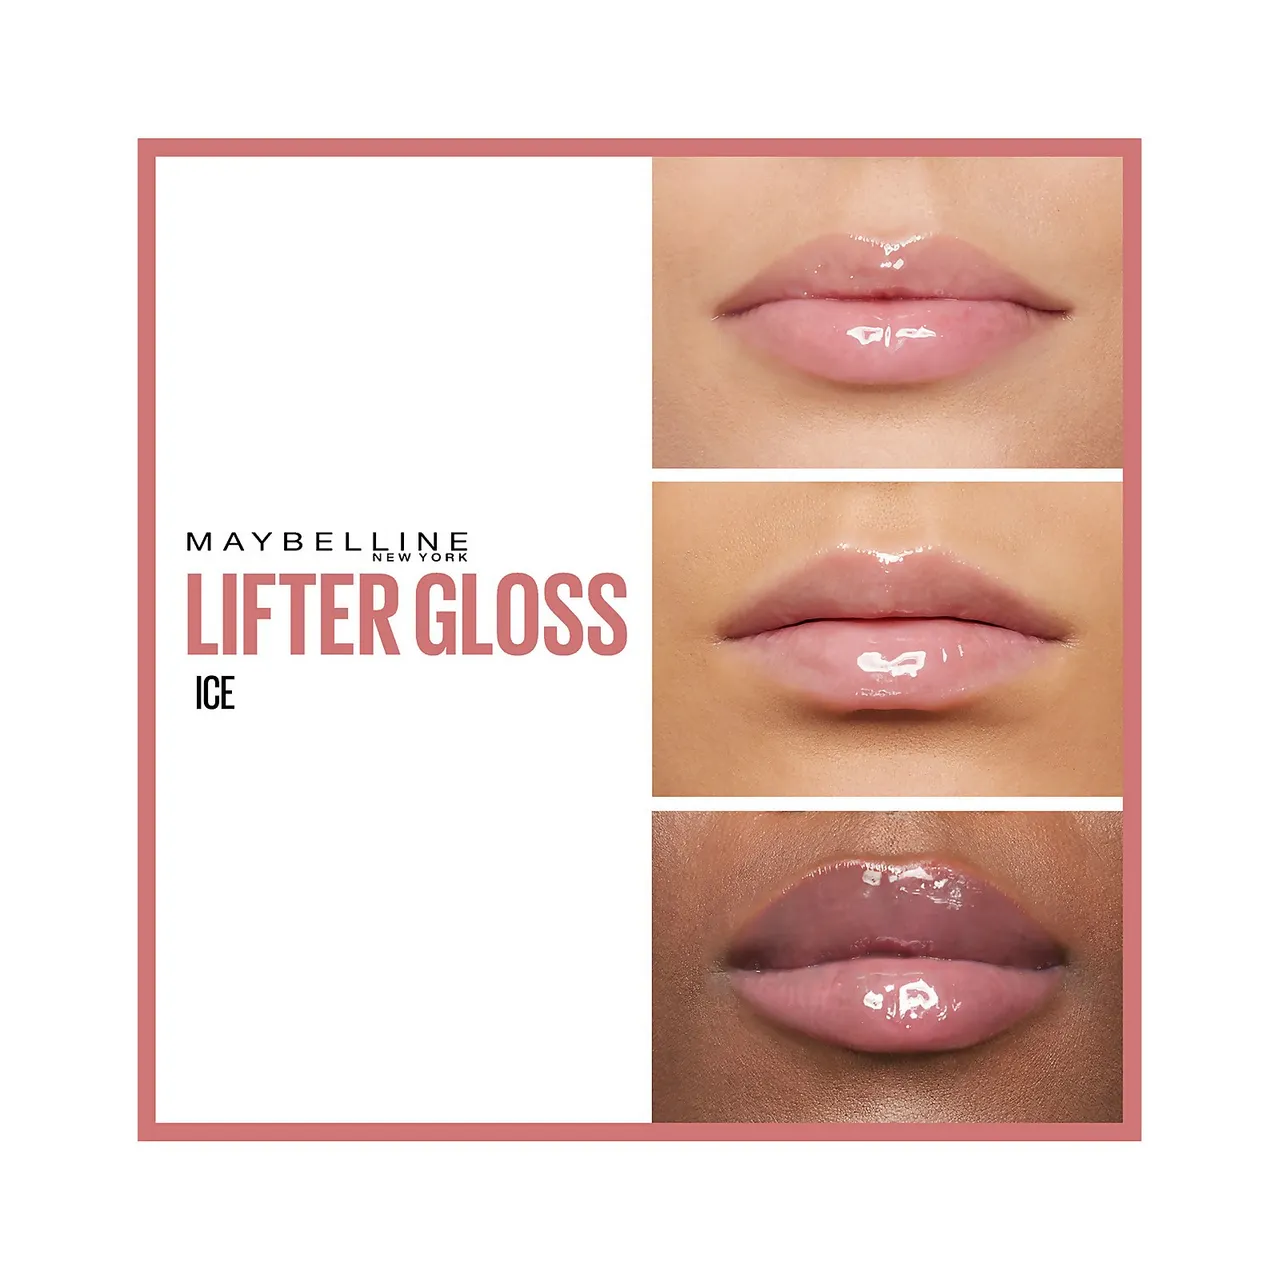 Maybelline Lifter Gloss Hydrating Lip Gloss with Hyaluronic Acid 5g (Various Shades) - 002 Ice